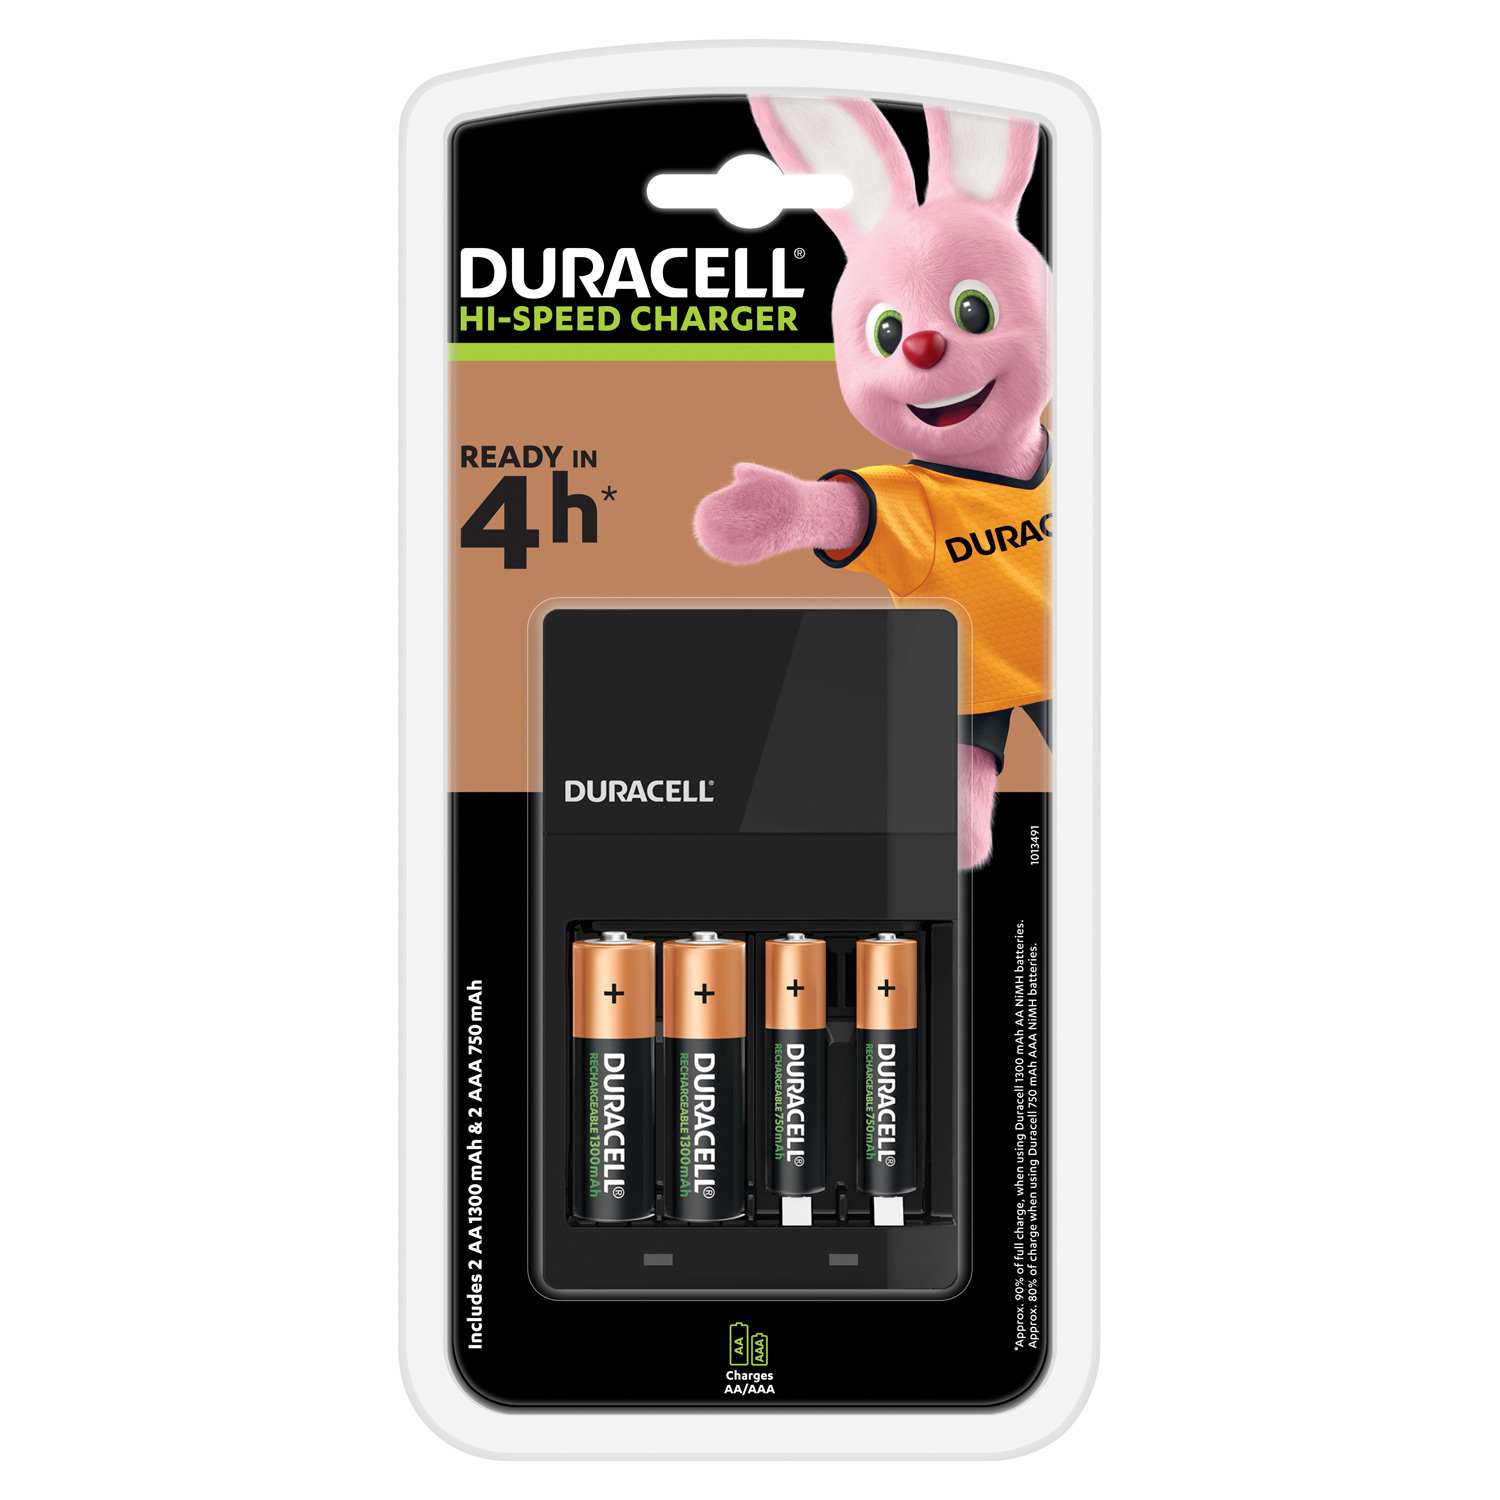 Duracell Oplader Charger Cef14 incl. 2x AA1300mah & 2x AAA 750mah, 5dlg.